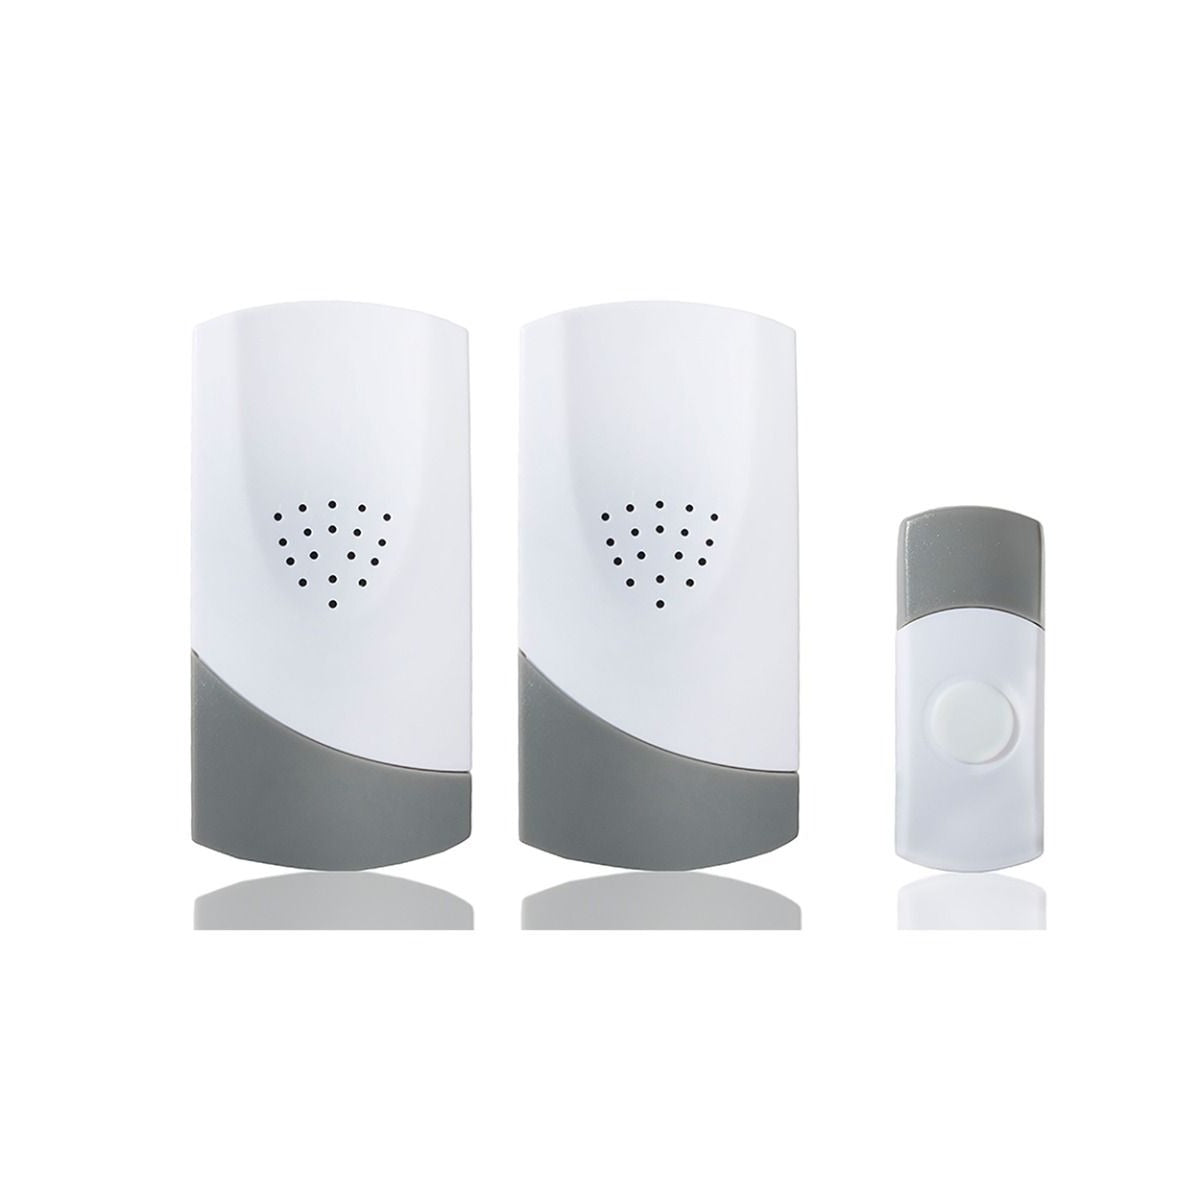 Pifco - Wireless Doorbell Chime Kit - Continental Food Store